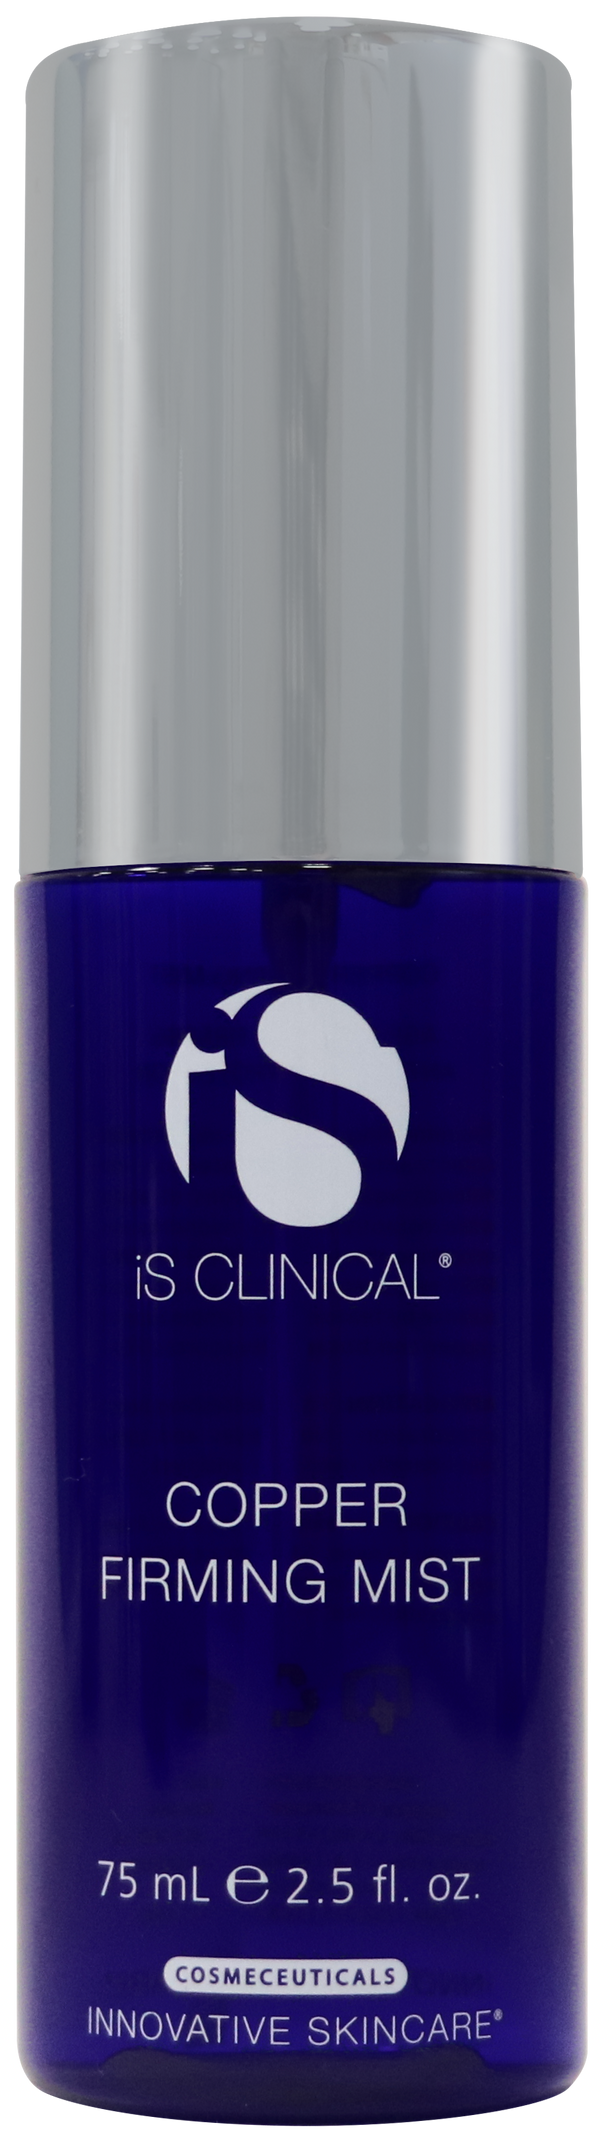 iS Clinical COPPER FIRMING MIST (75ml)